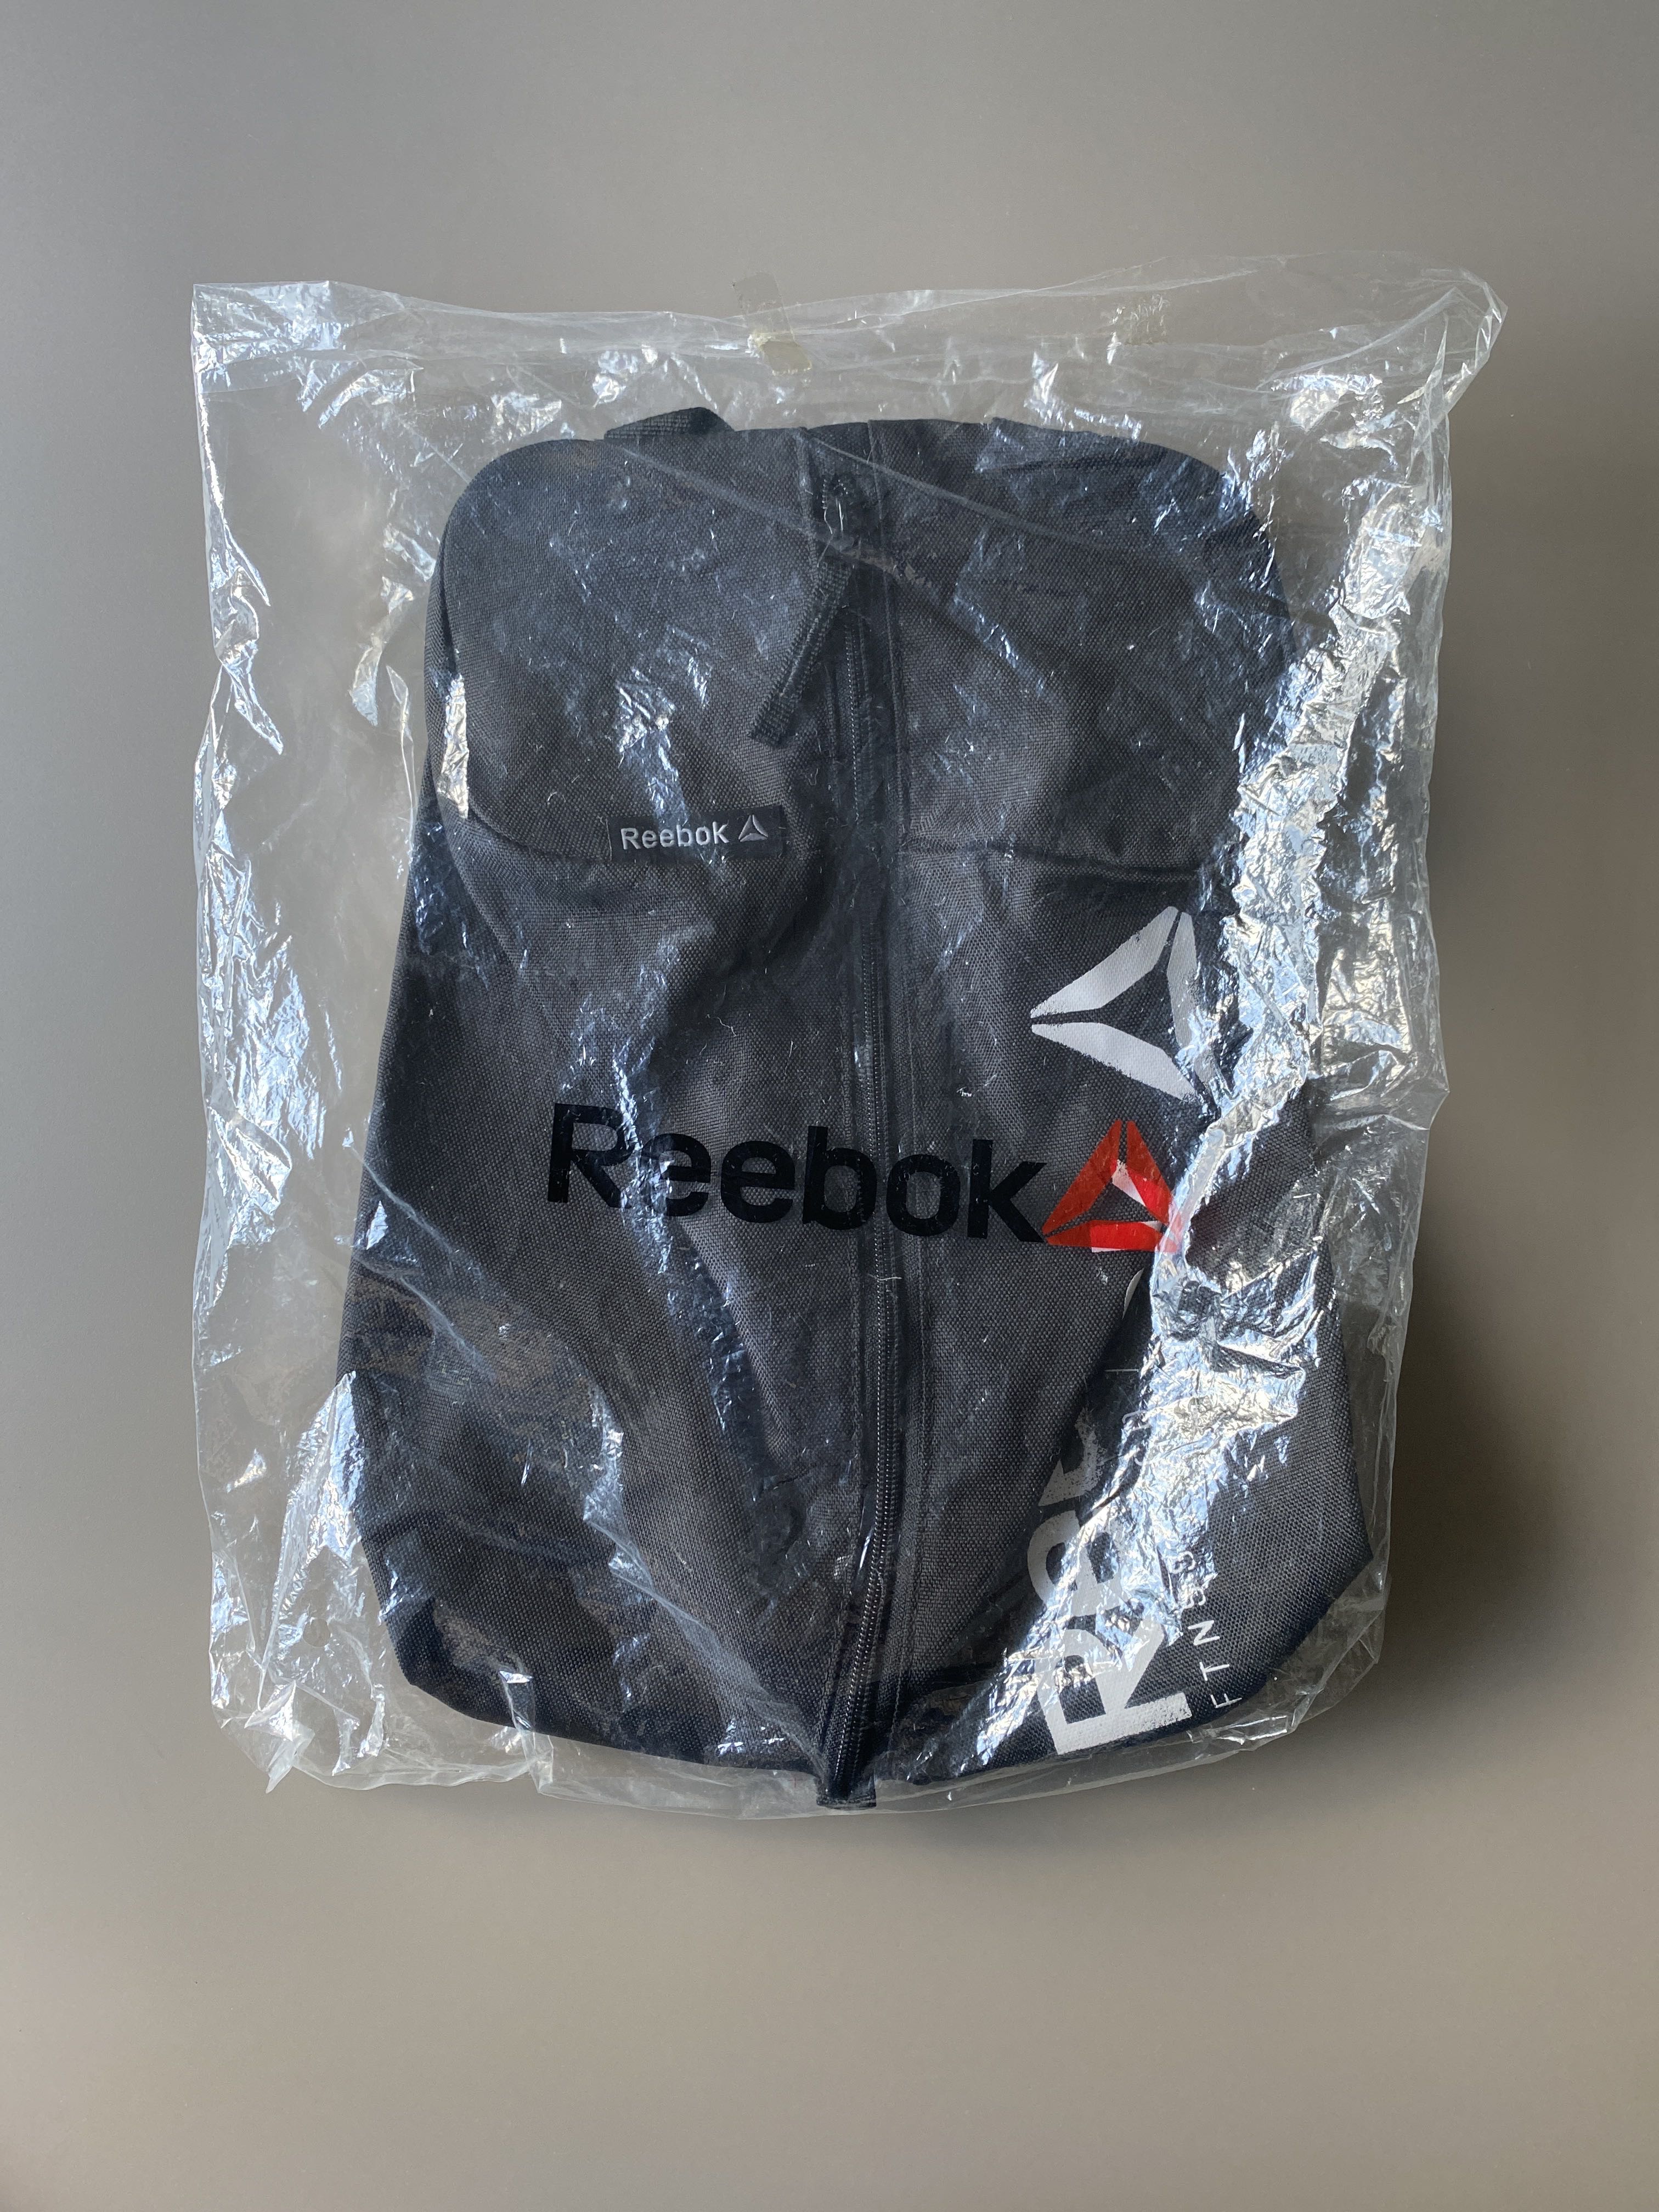 BN Reebok Bag, Sports Equipment, Sports and Supplies on Carousell